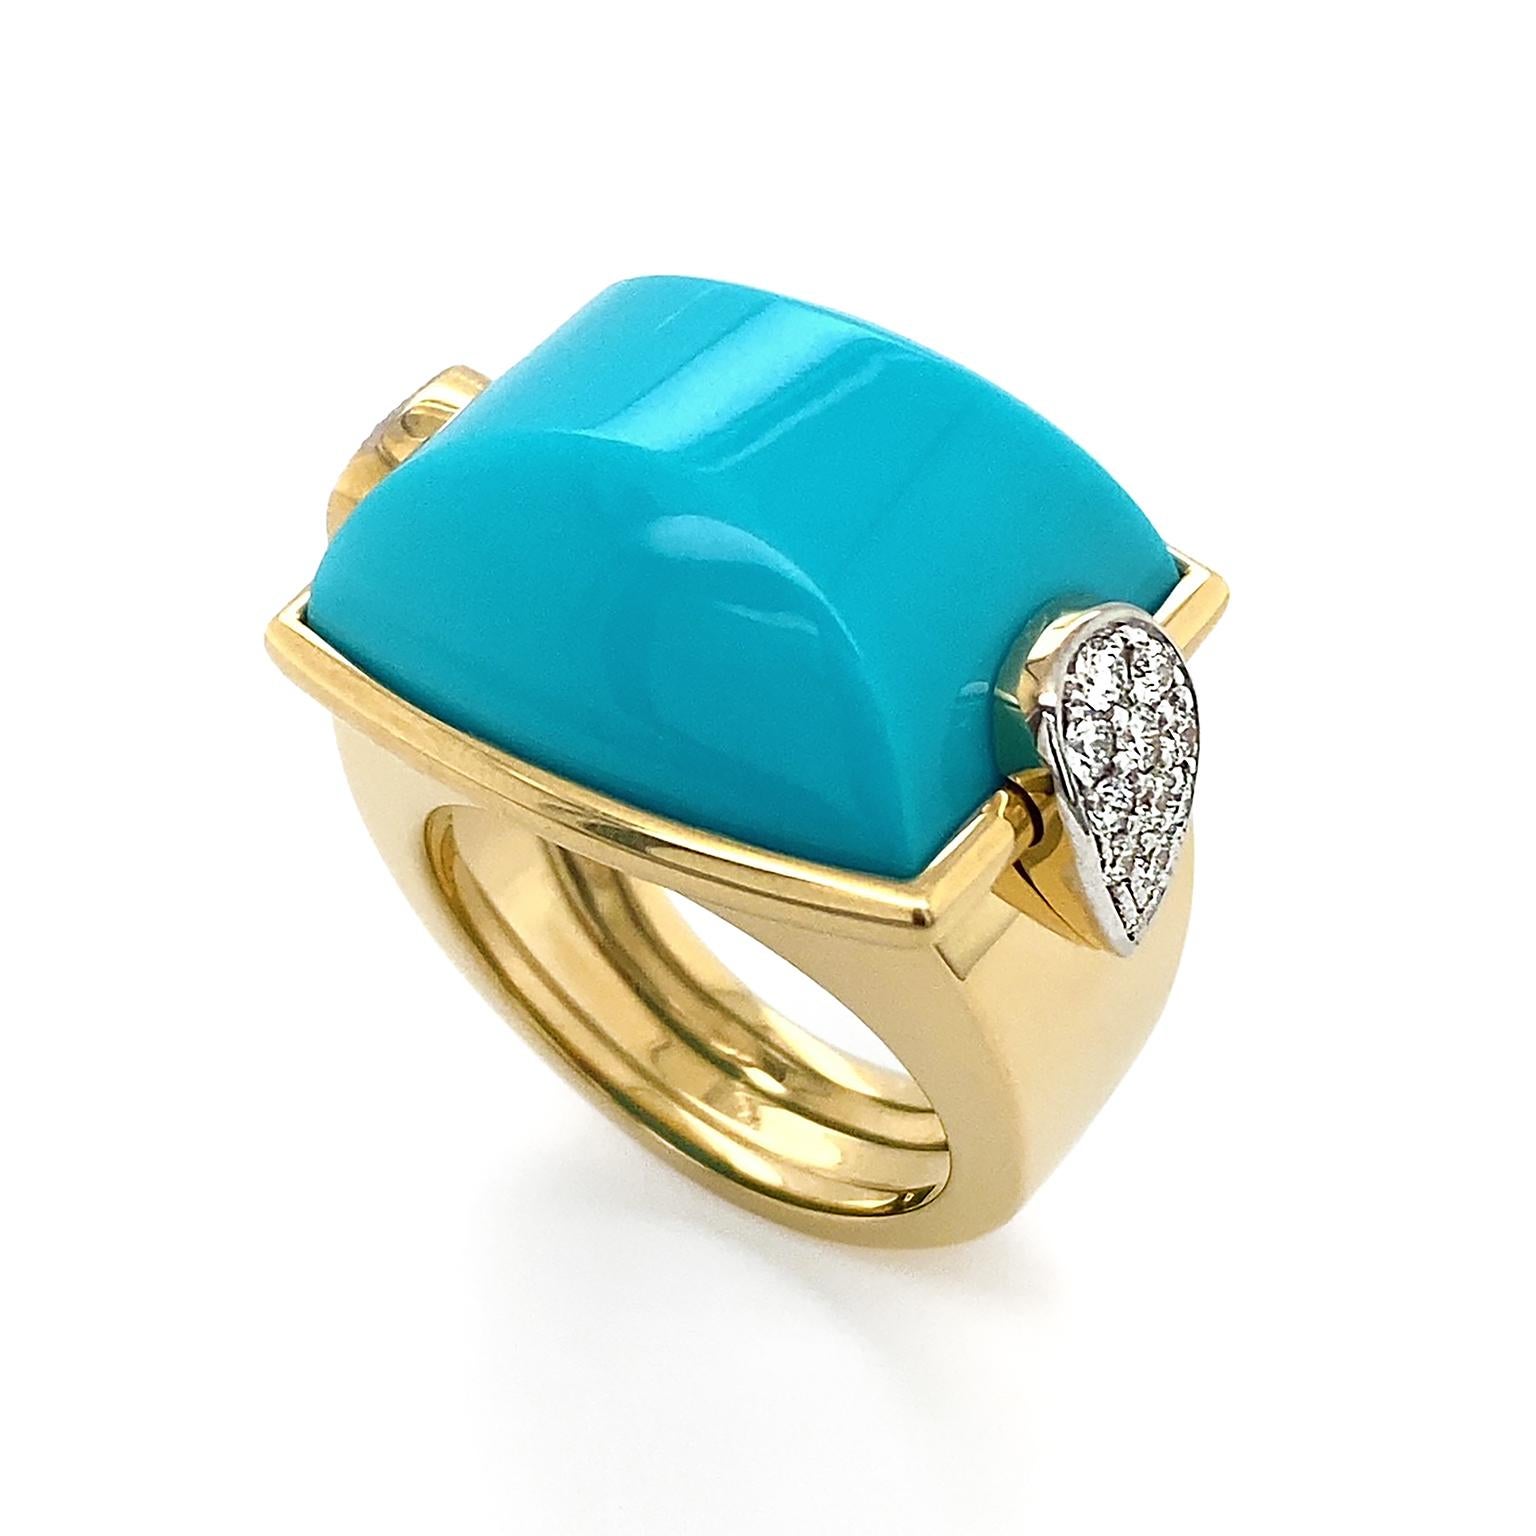 The natural radiance of turquoise is the spotlight of this diamond-accented La Vallette ring. Carved in a cushion, the prized color of turquoise is displayed. Sleeping Beauty Turquoise has become a scarce gem due to low supply, yet remains a